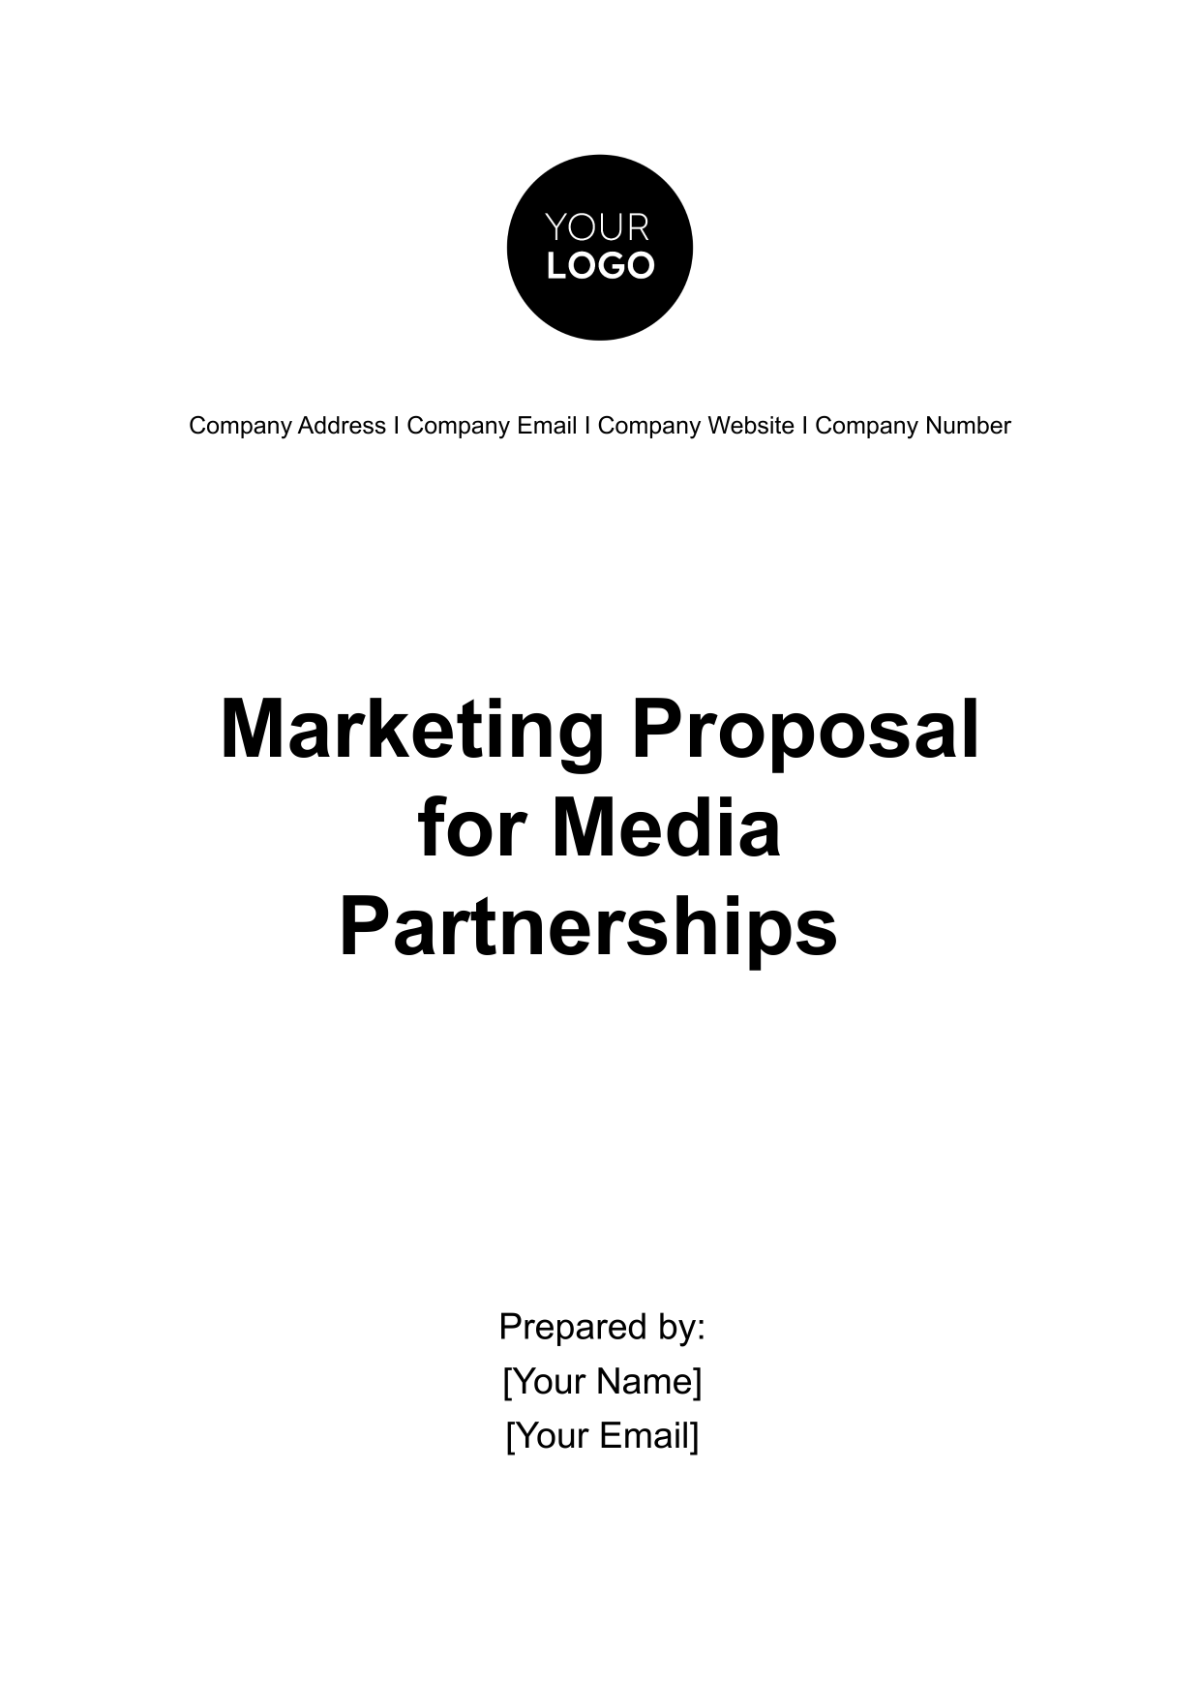 Free Marketing Proposal for Media Partnerships Template